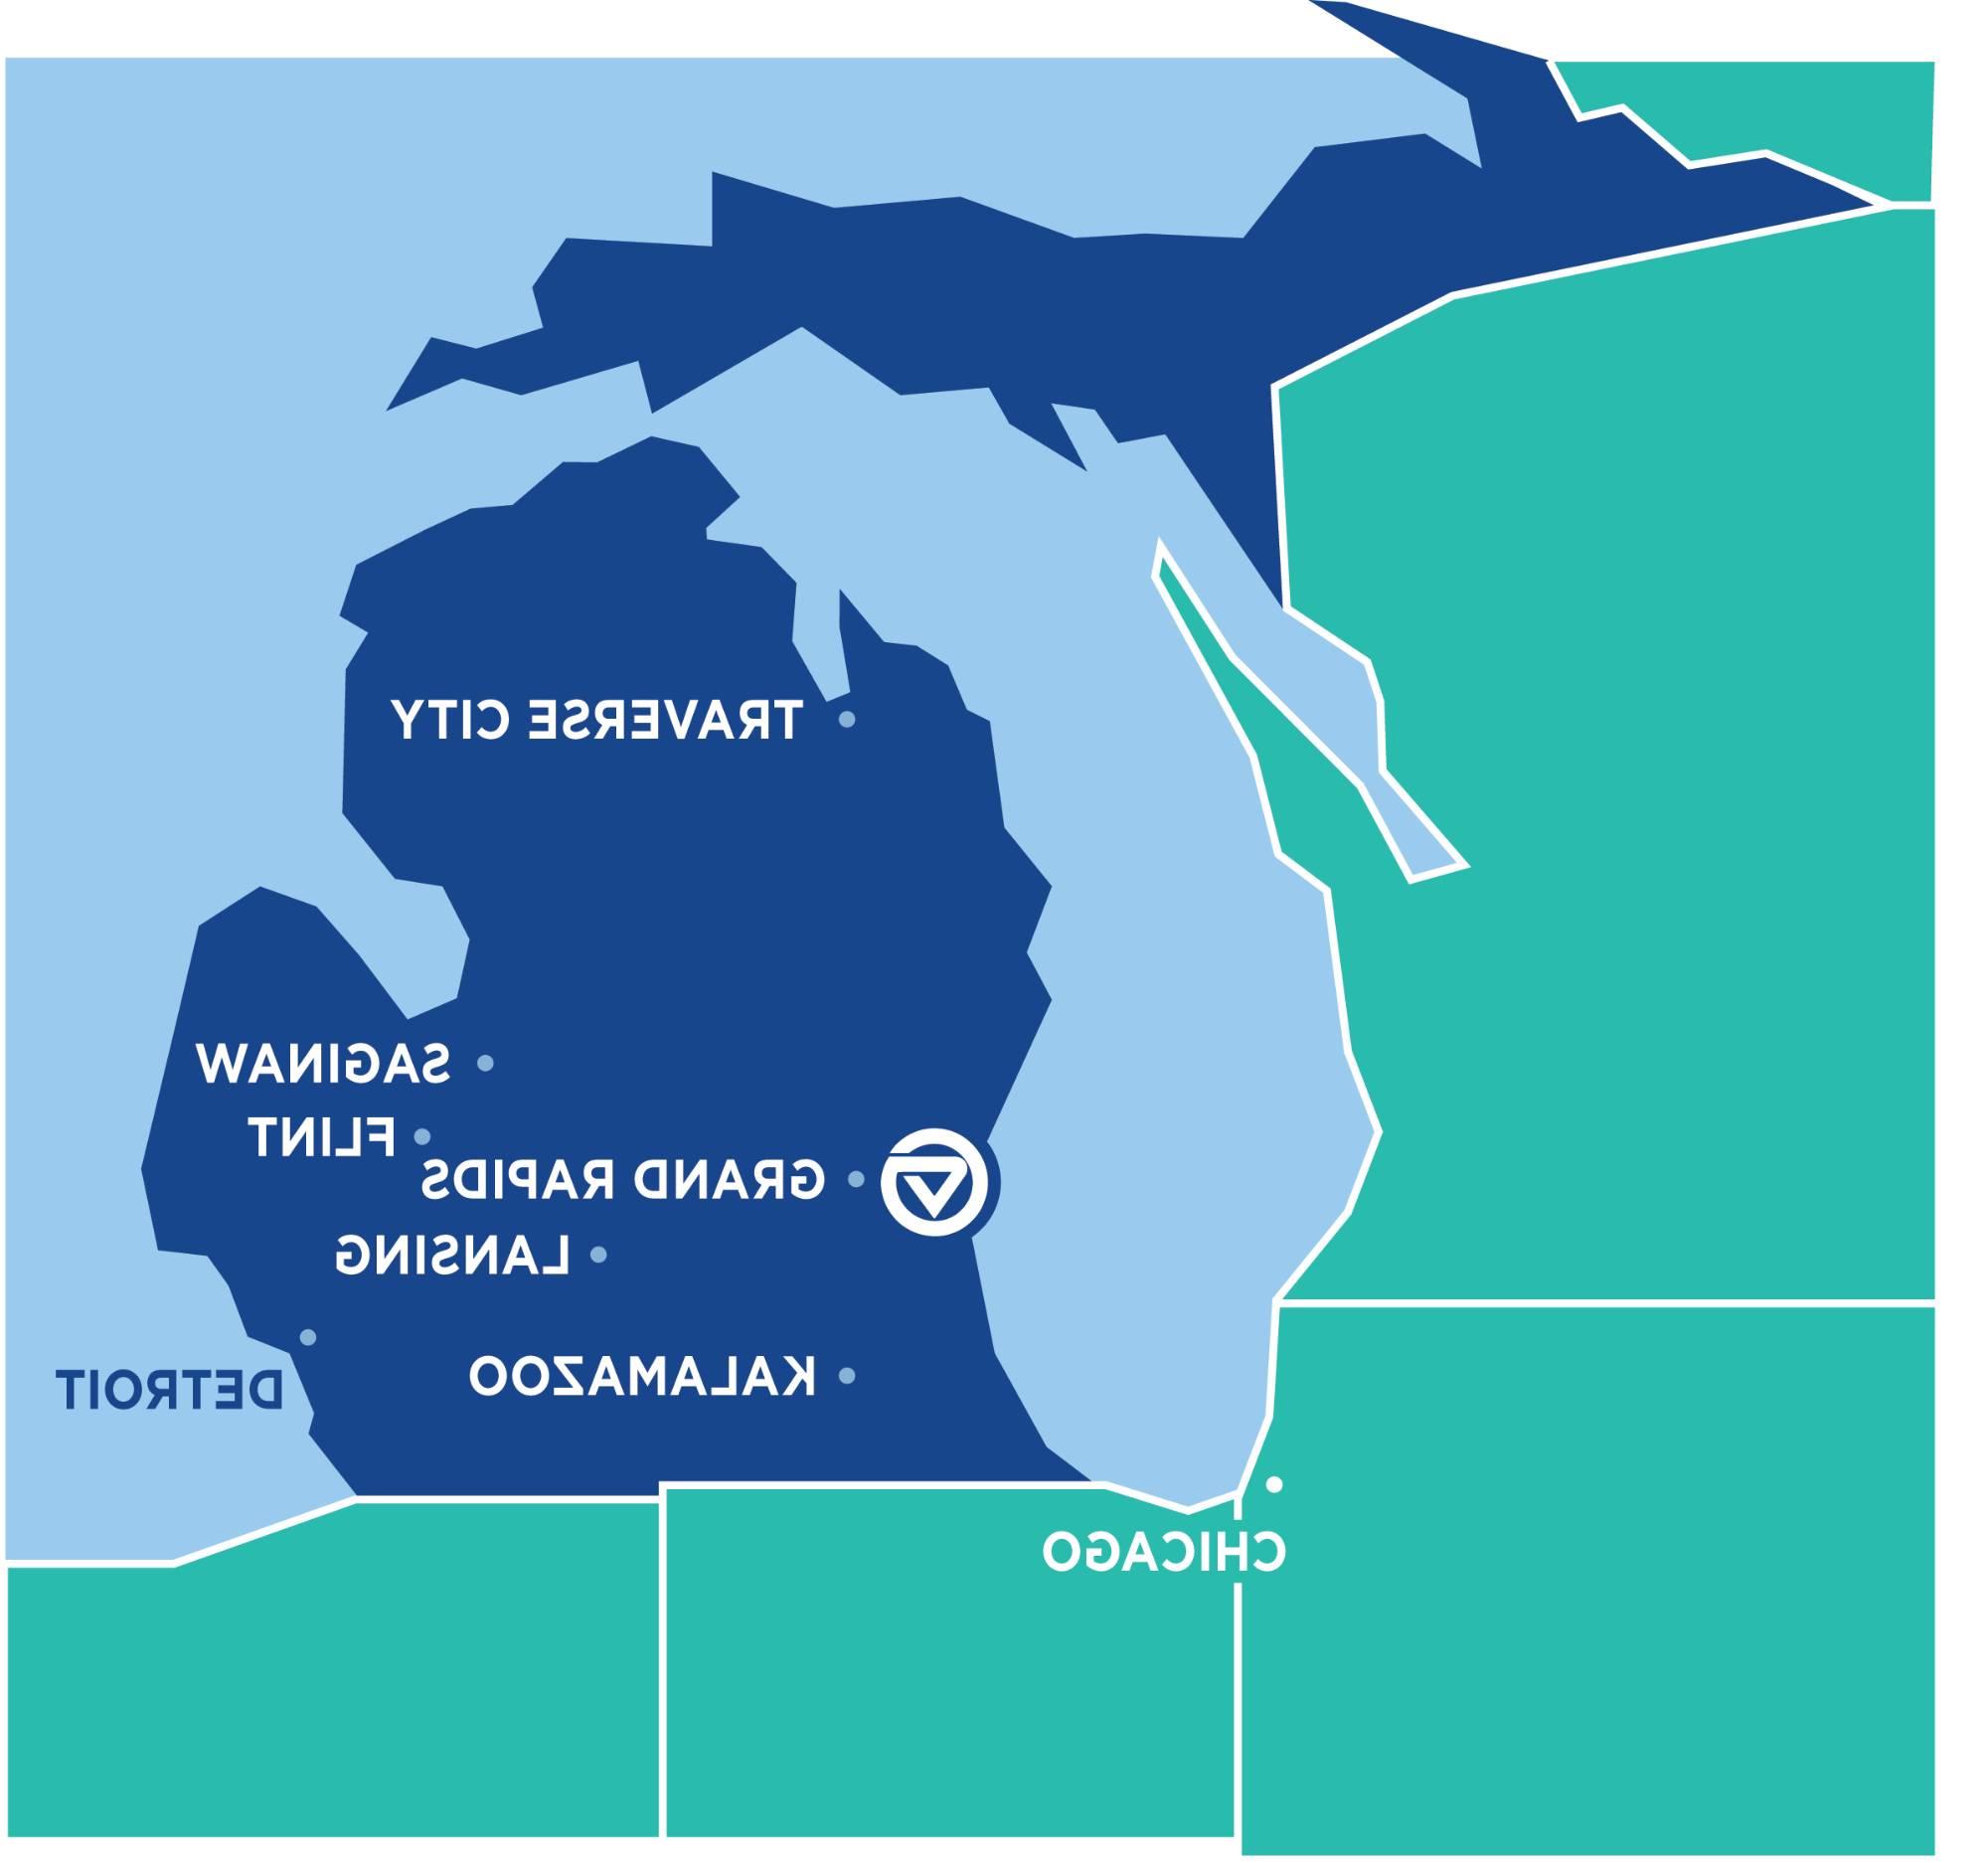 The map of Michigan with GVSU, Grand Rapids, and Chicago marked.